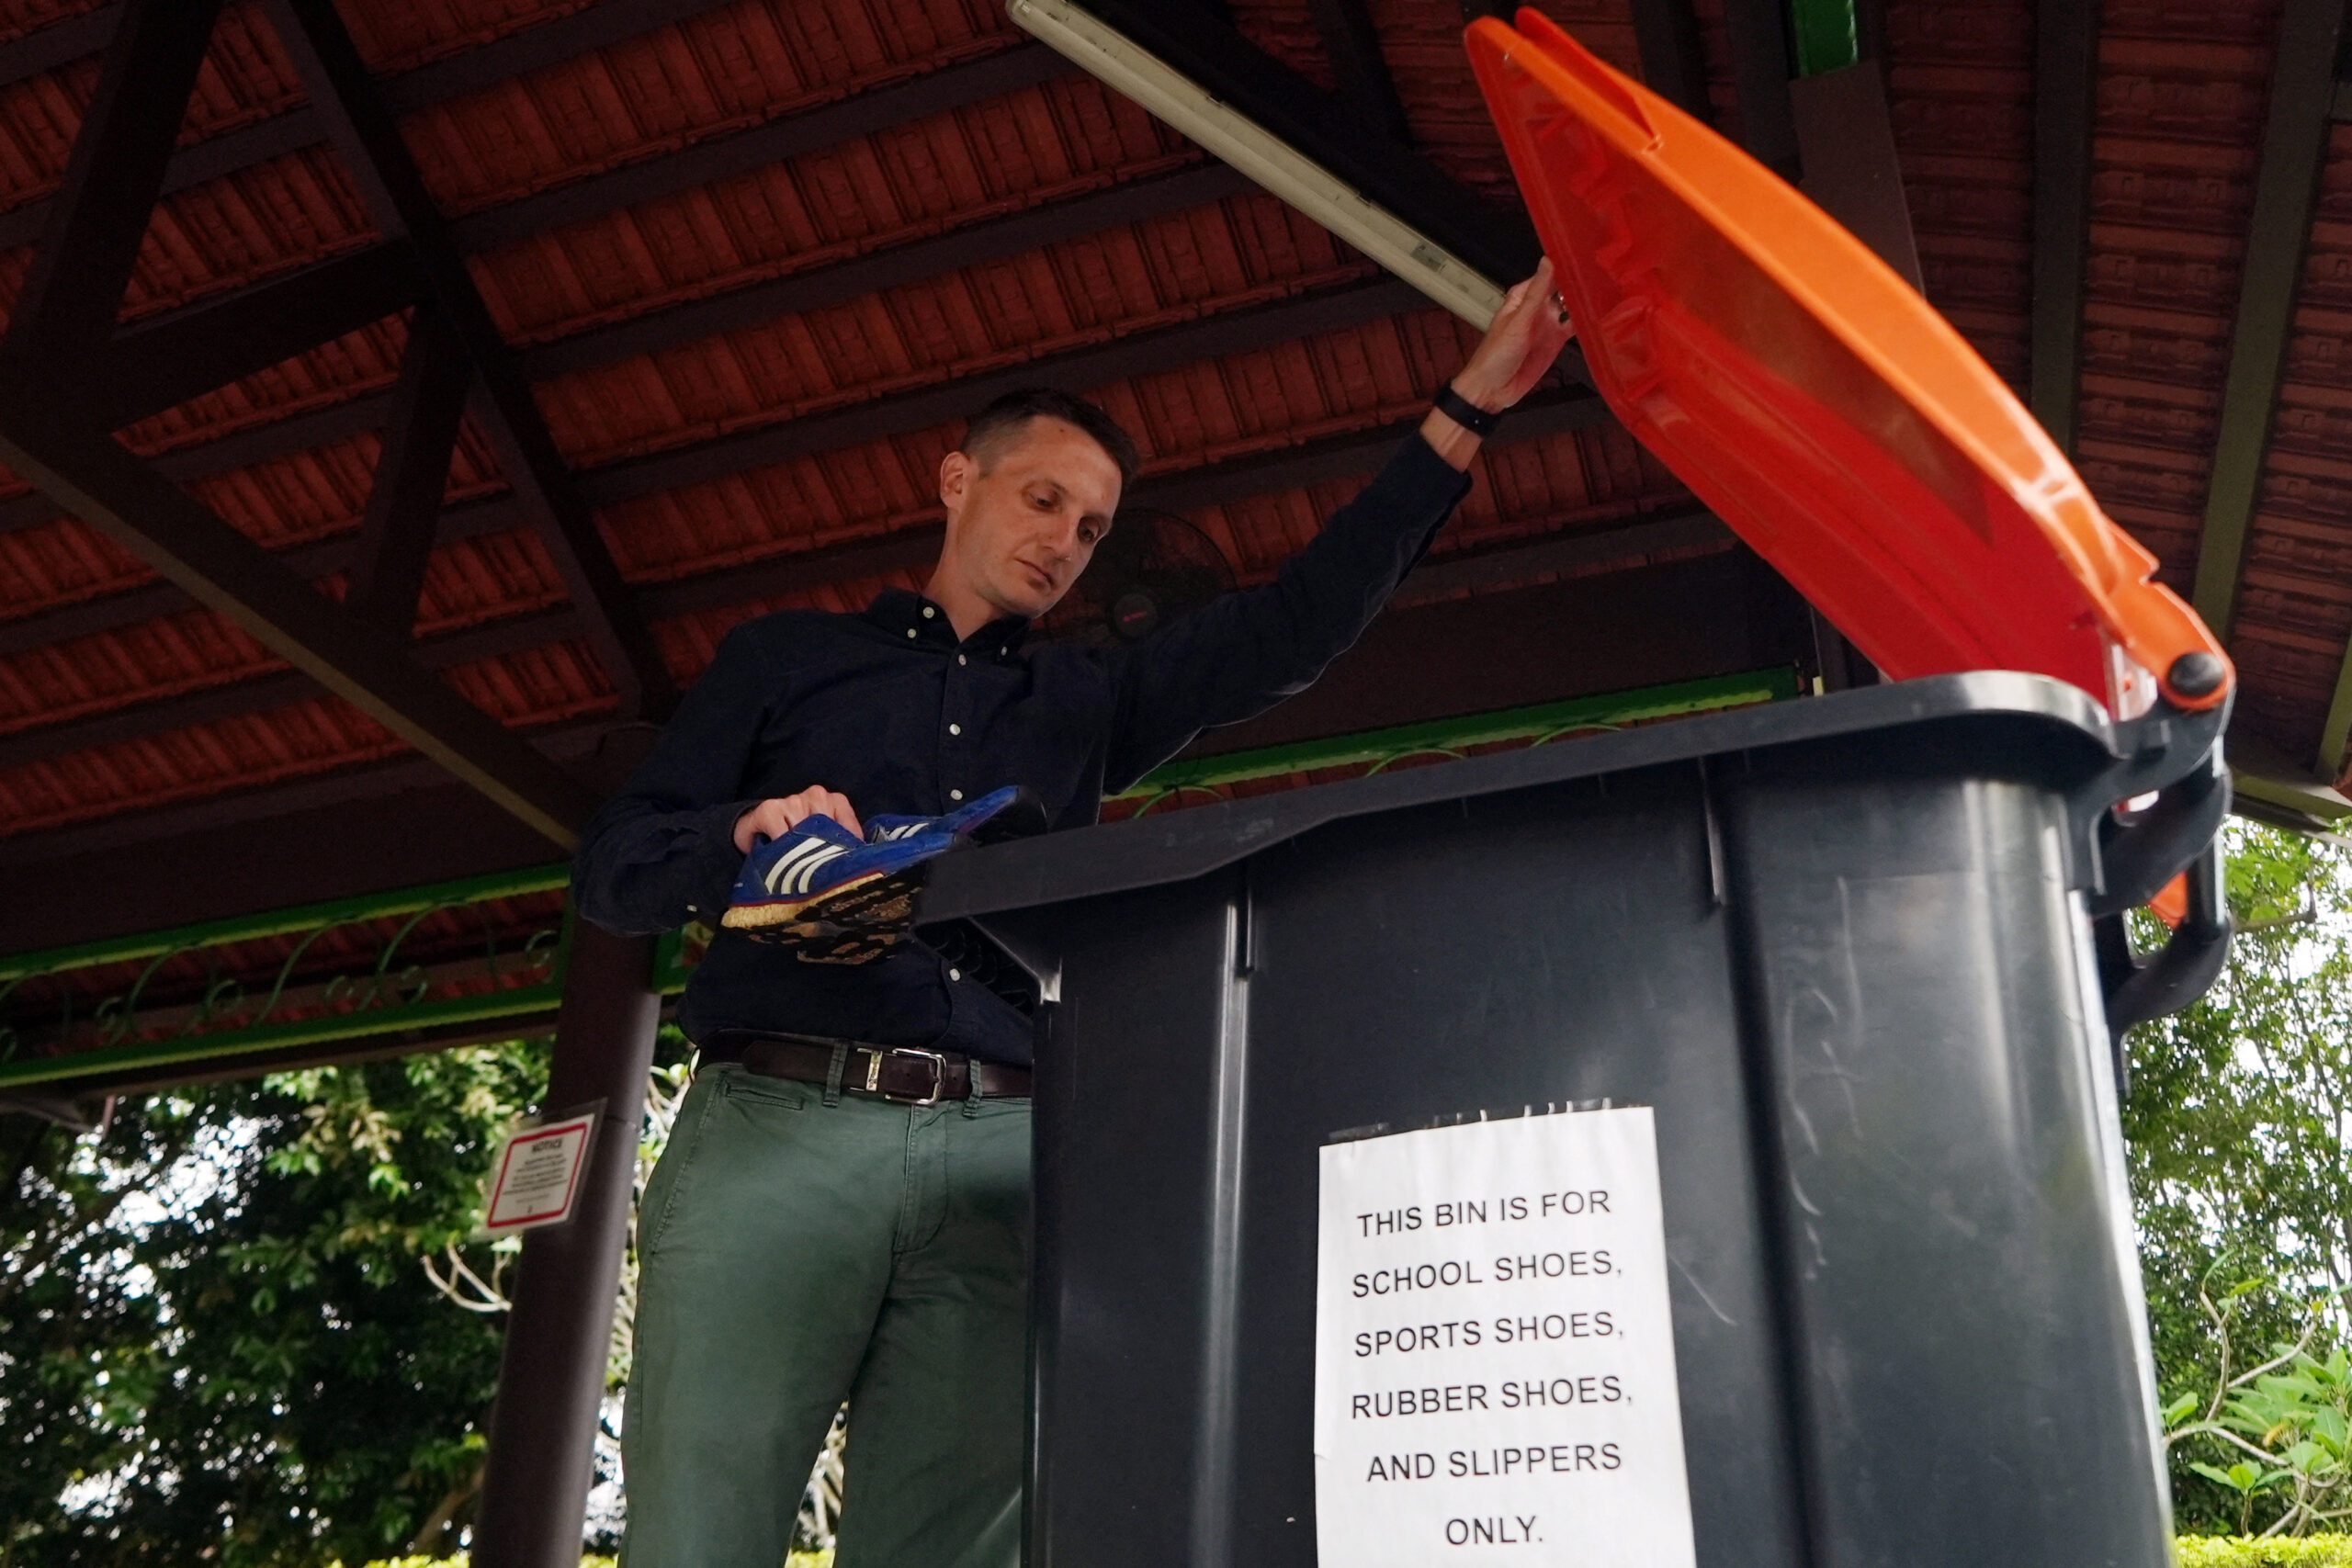 Reuters reporter Joe Brock drops off a pair of shoes containing a tracking device, at a shoe recycling bin, in a public park in Singapore, September 7, 2022. REUTERS/Joseph Campbell